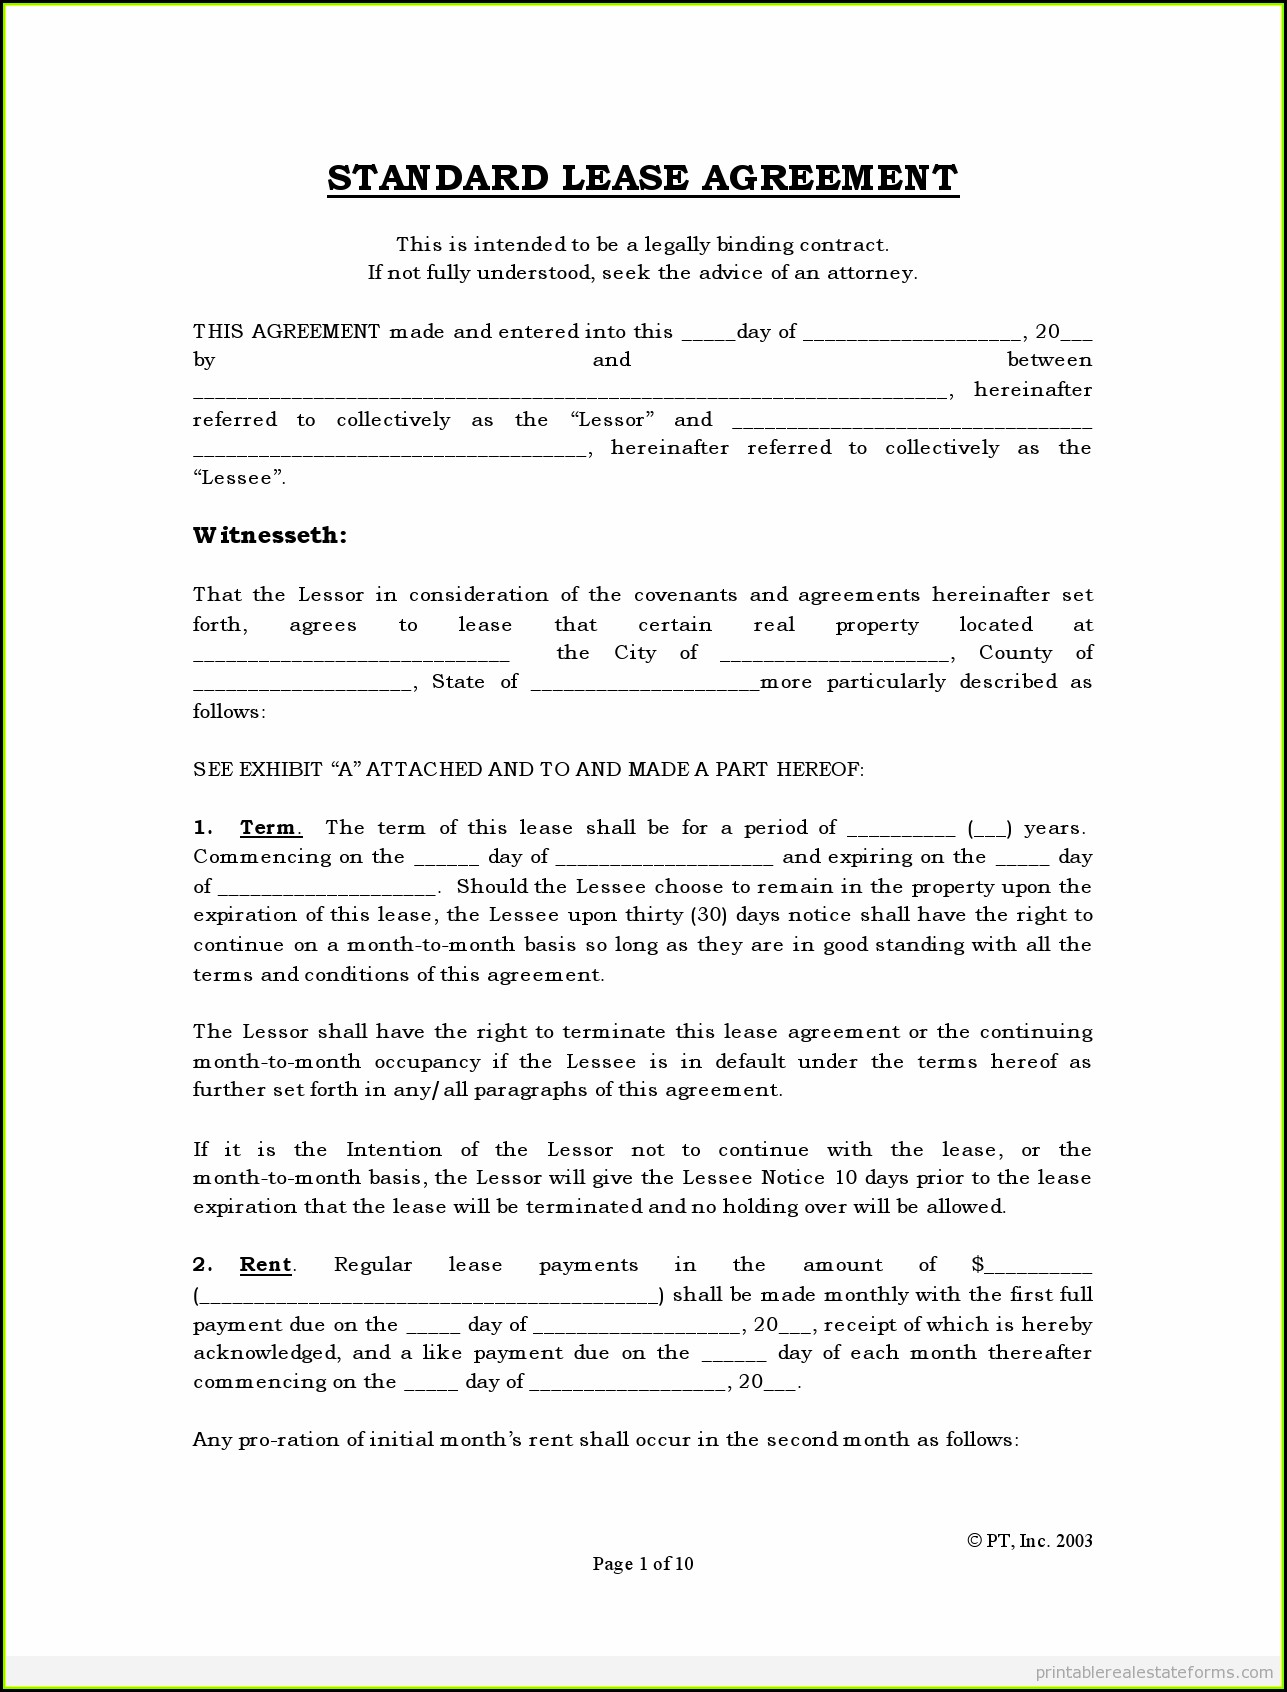 Lease Agreement In Spanish Gtld World Congress Rental Agreement In 